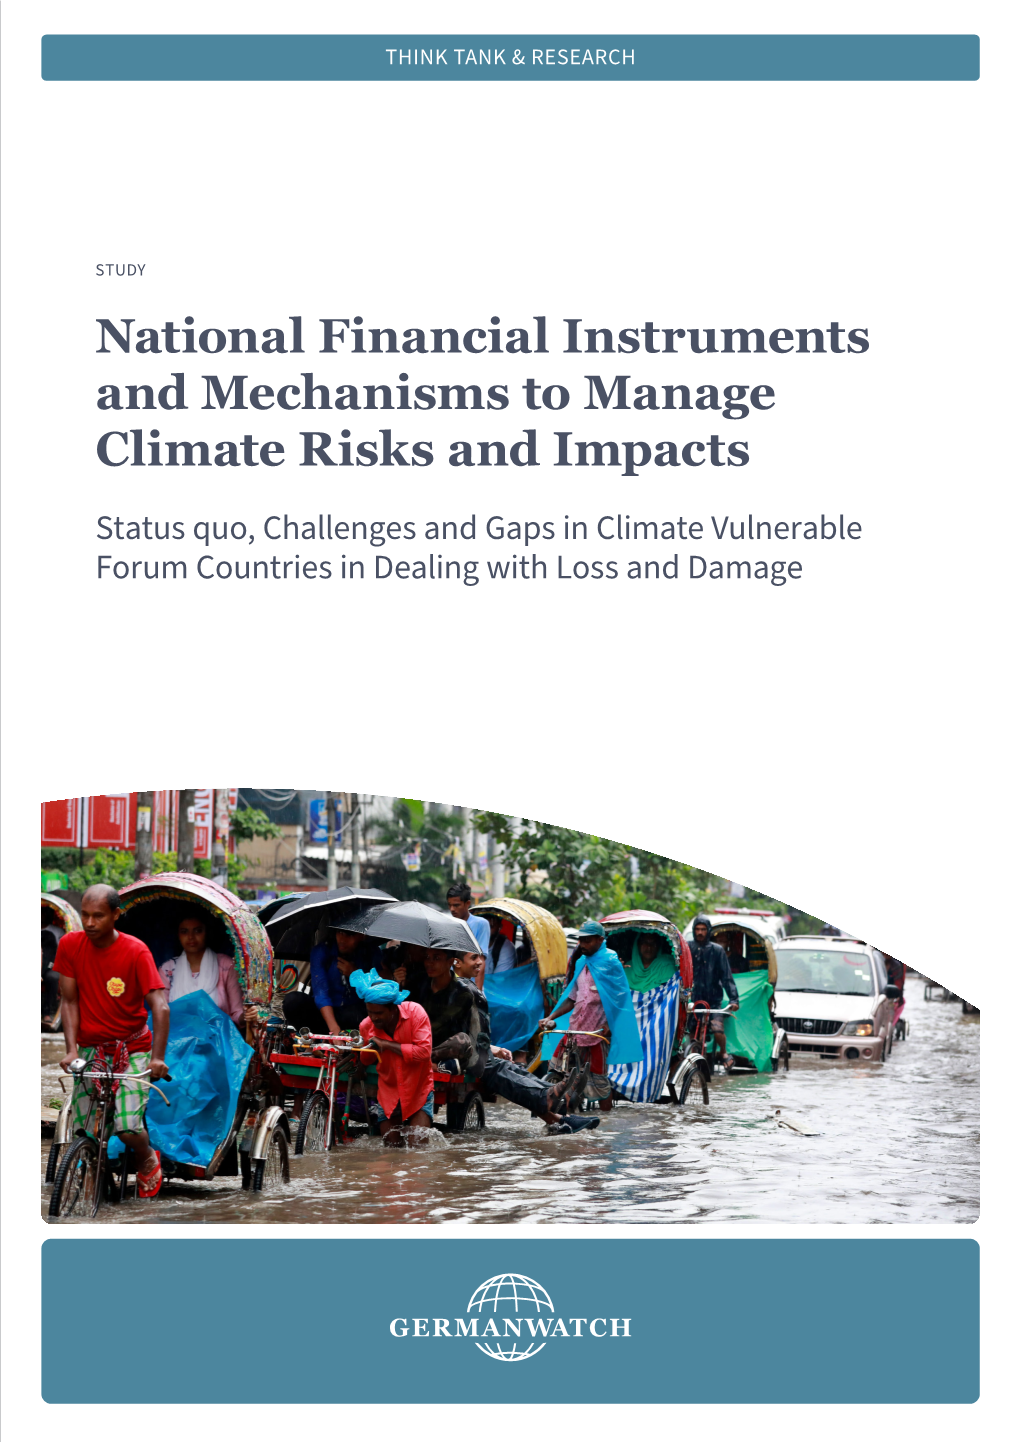 National Financial Instruments and Mechanisms to Manage Climate Risks and Impacts